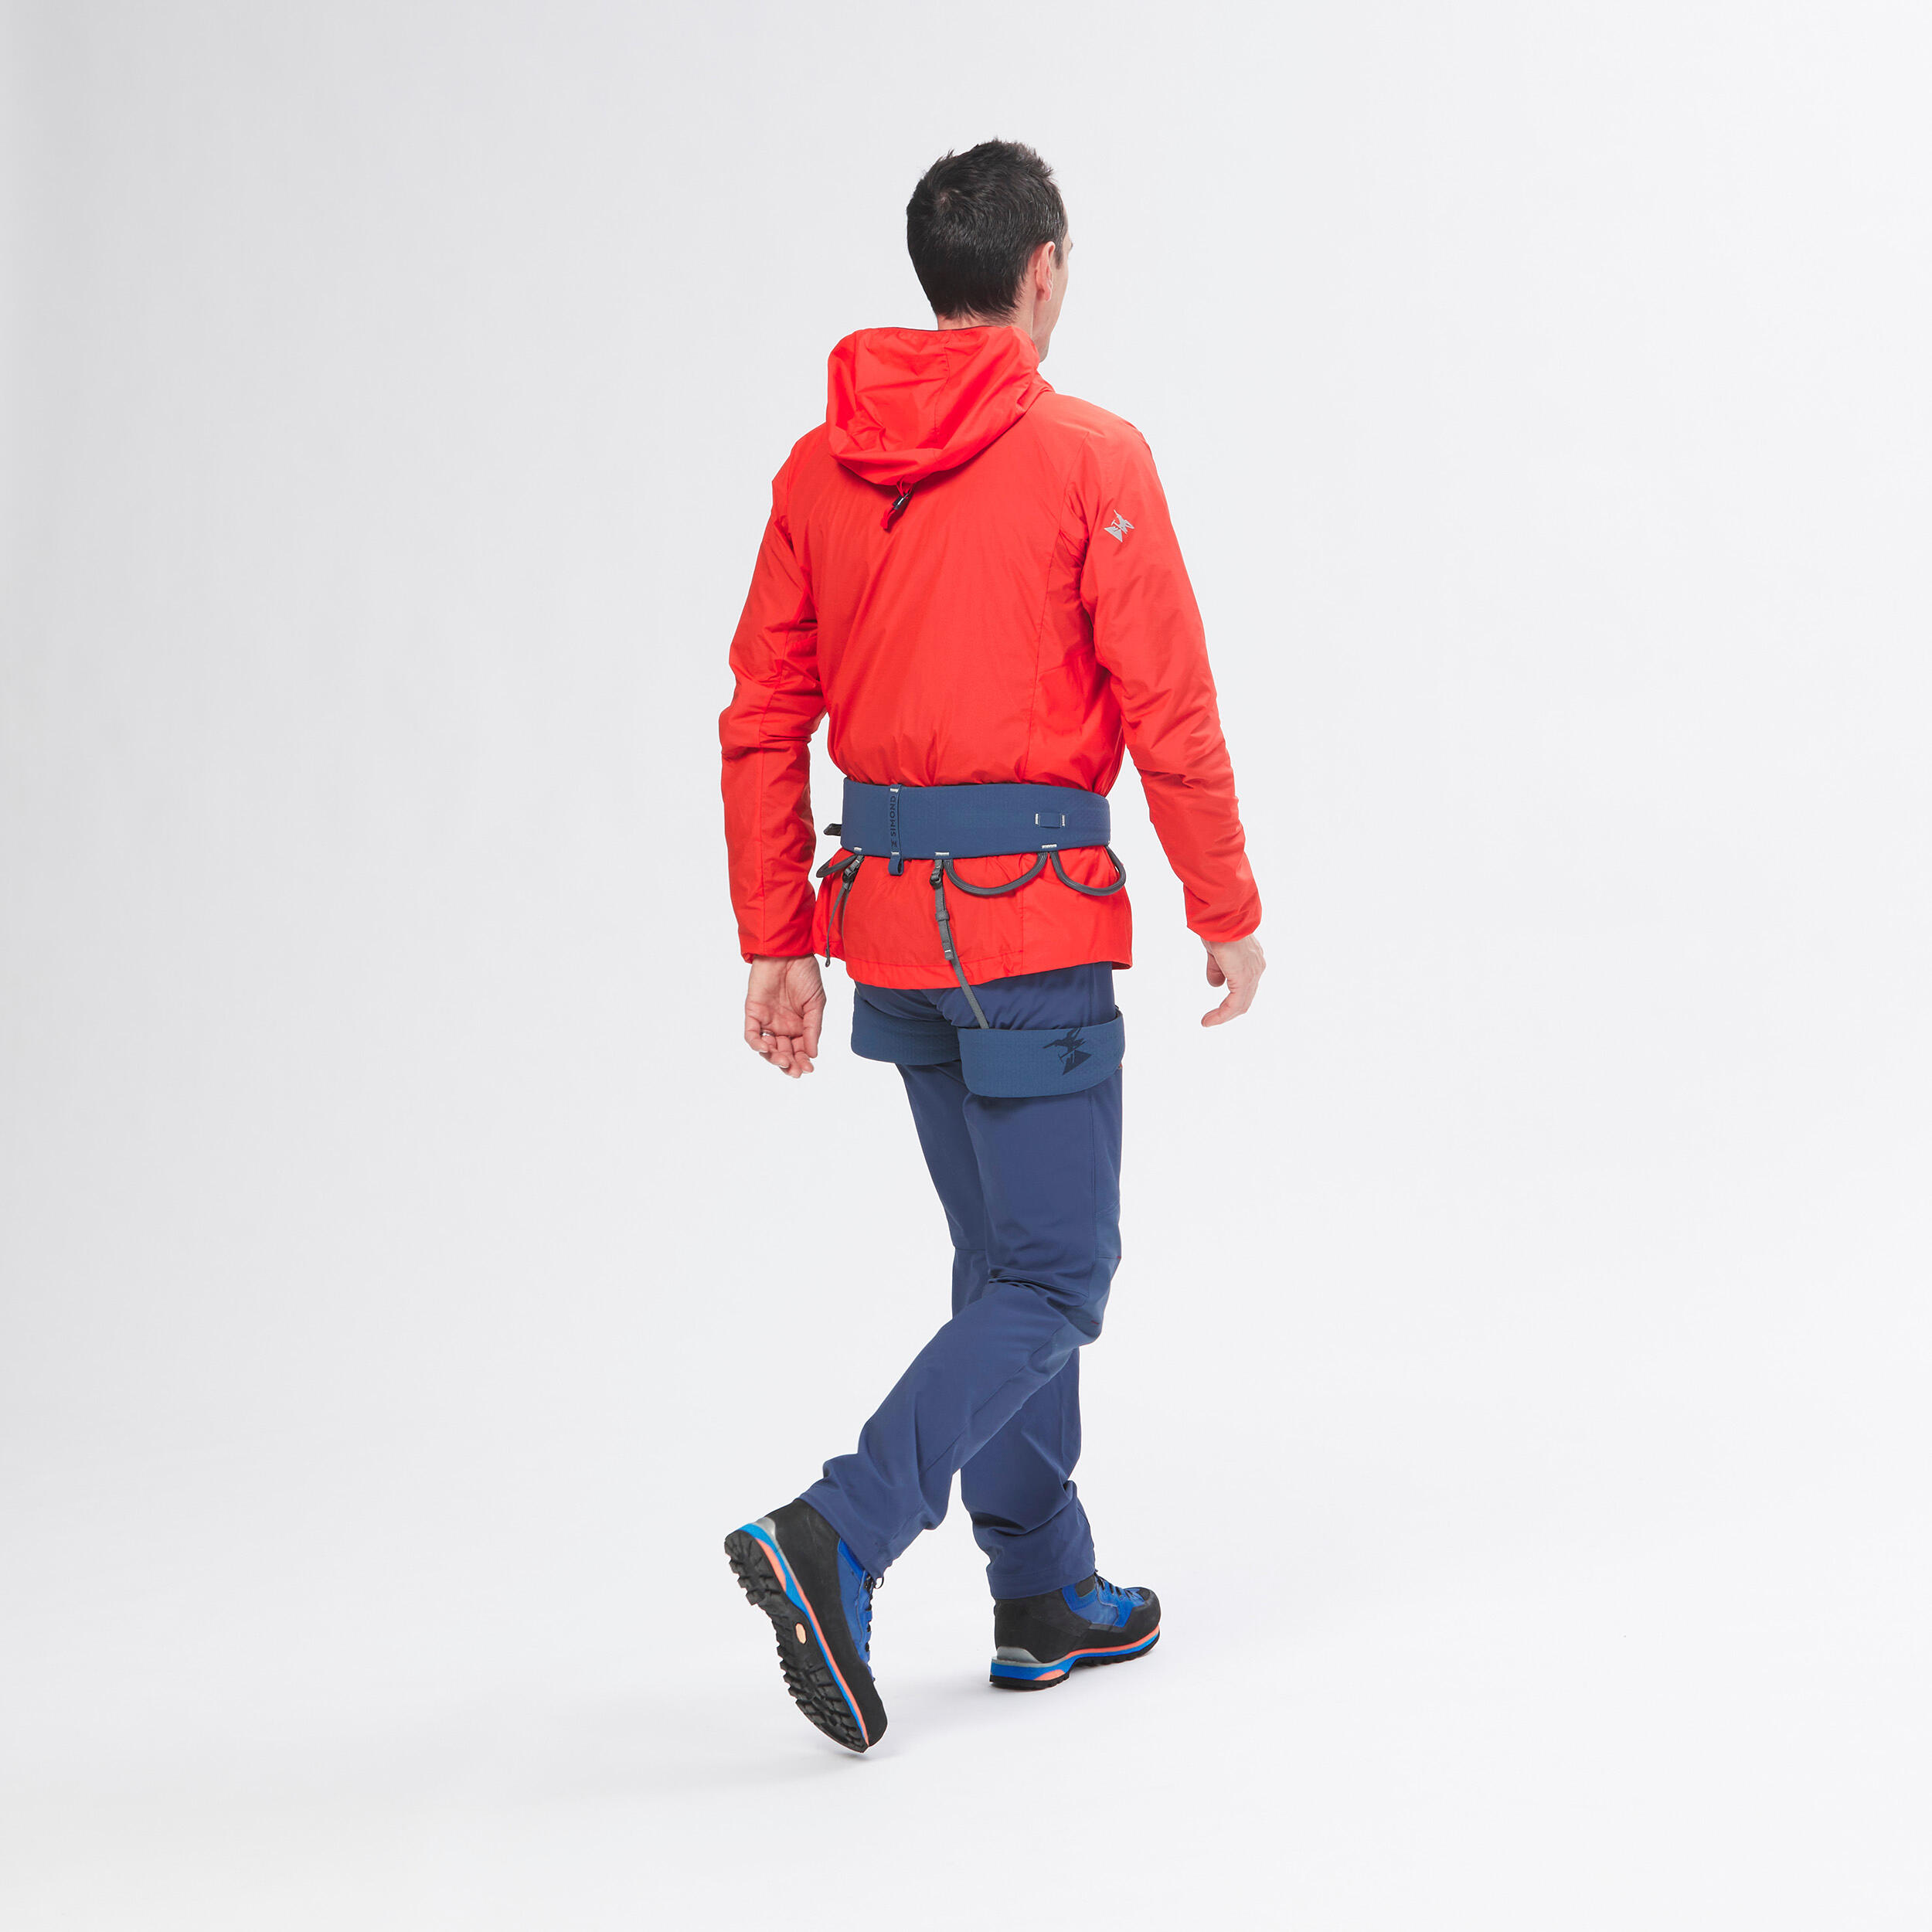 MEN'S WINDPROOF JACKET FOR MOUNTAINEERING - VERMILION RED 6/16